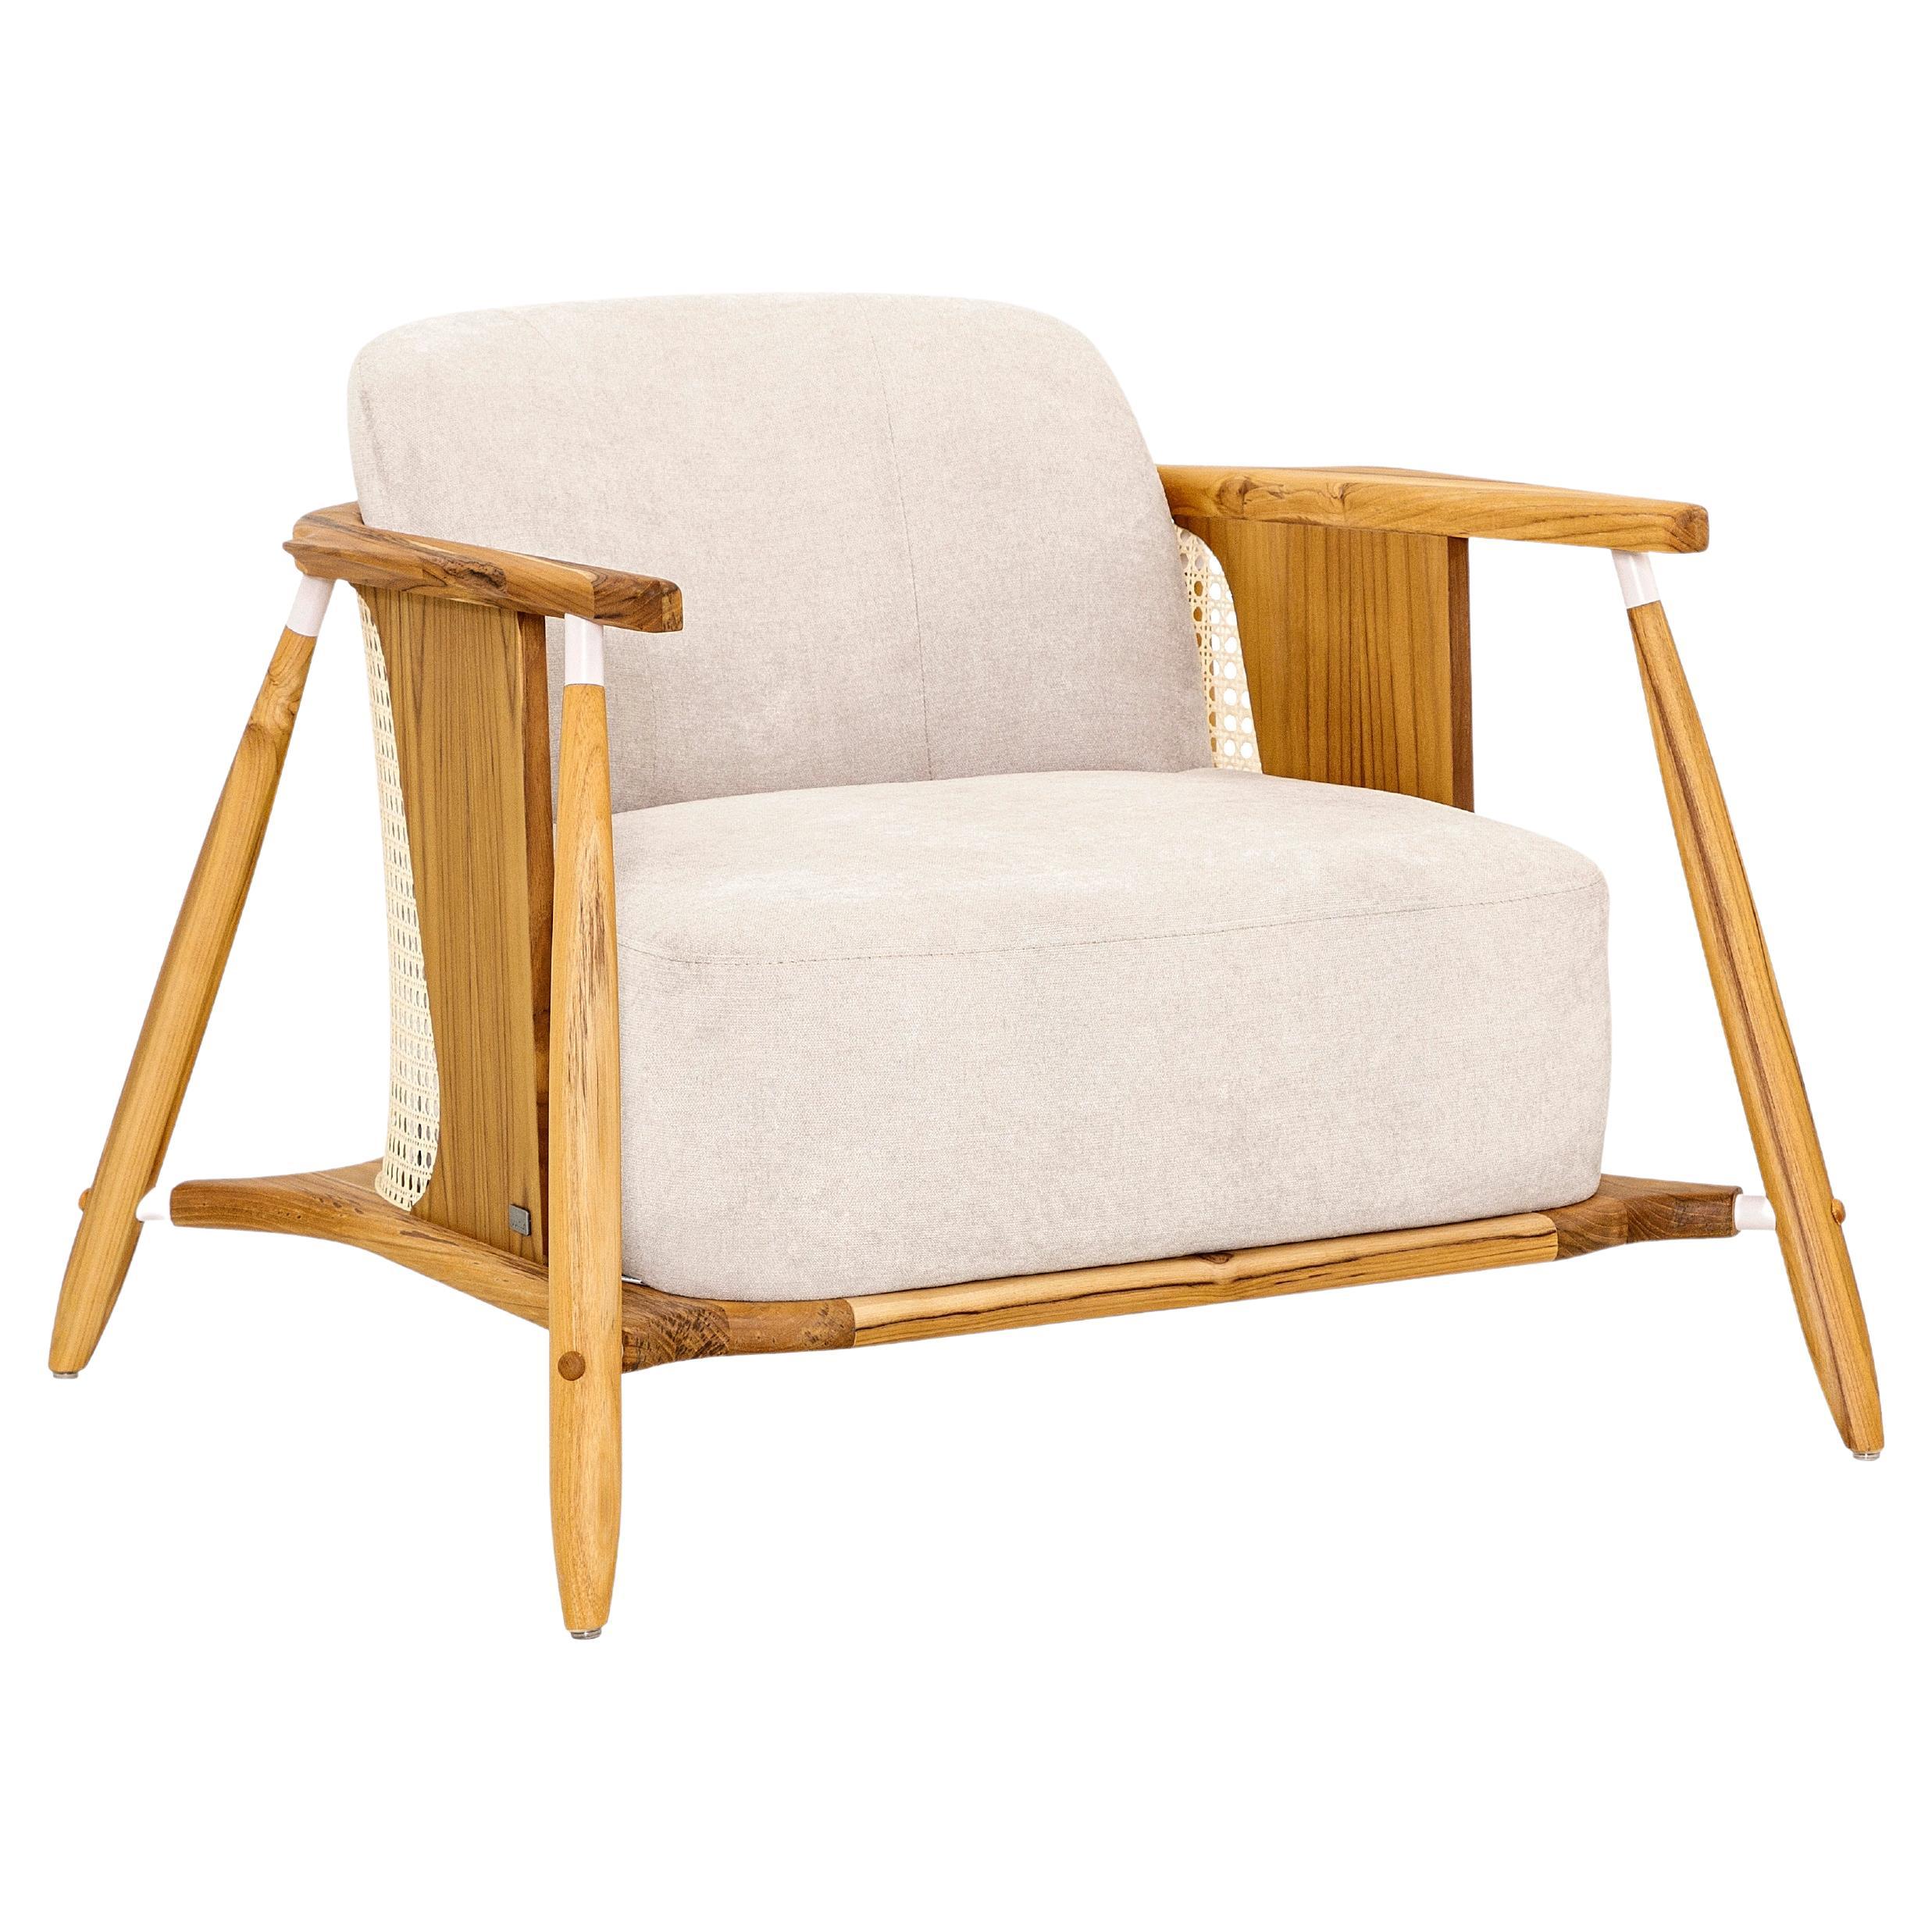 The designer Aciole Felix with our creative Uultis team from Brazil has created this amazing Laguna occasional chair with an upholstered light beige fabric and teak wood finish for the frame and legs. Exploring the main visual elements of modern